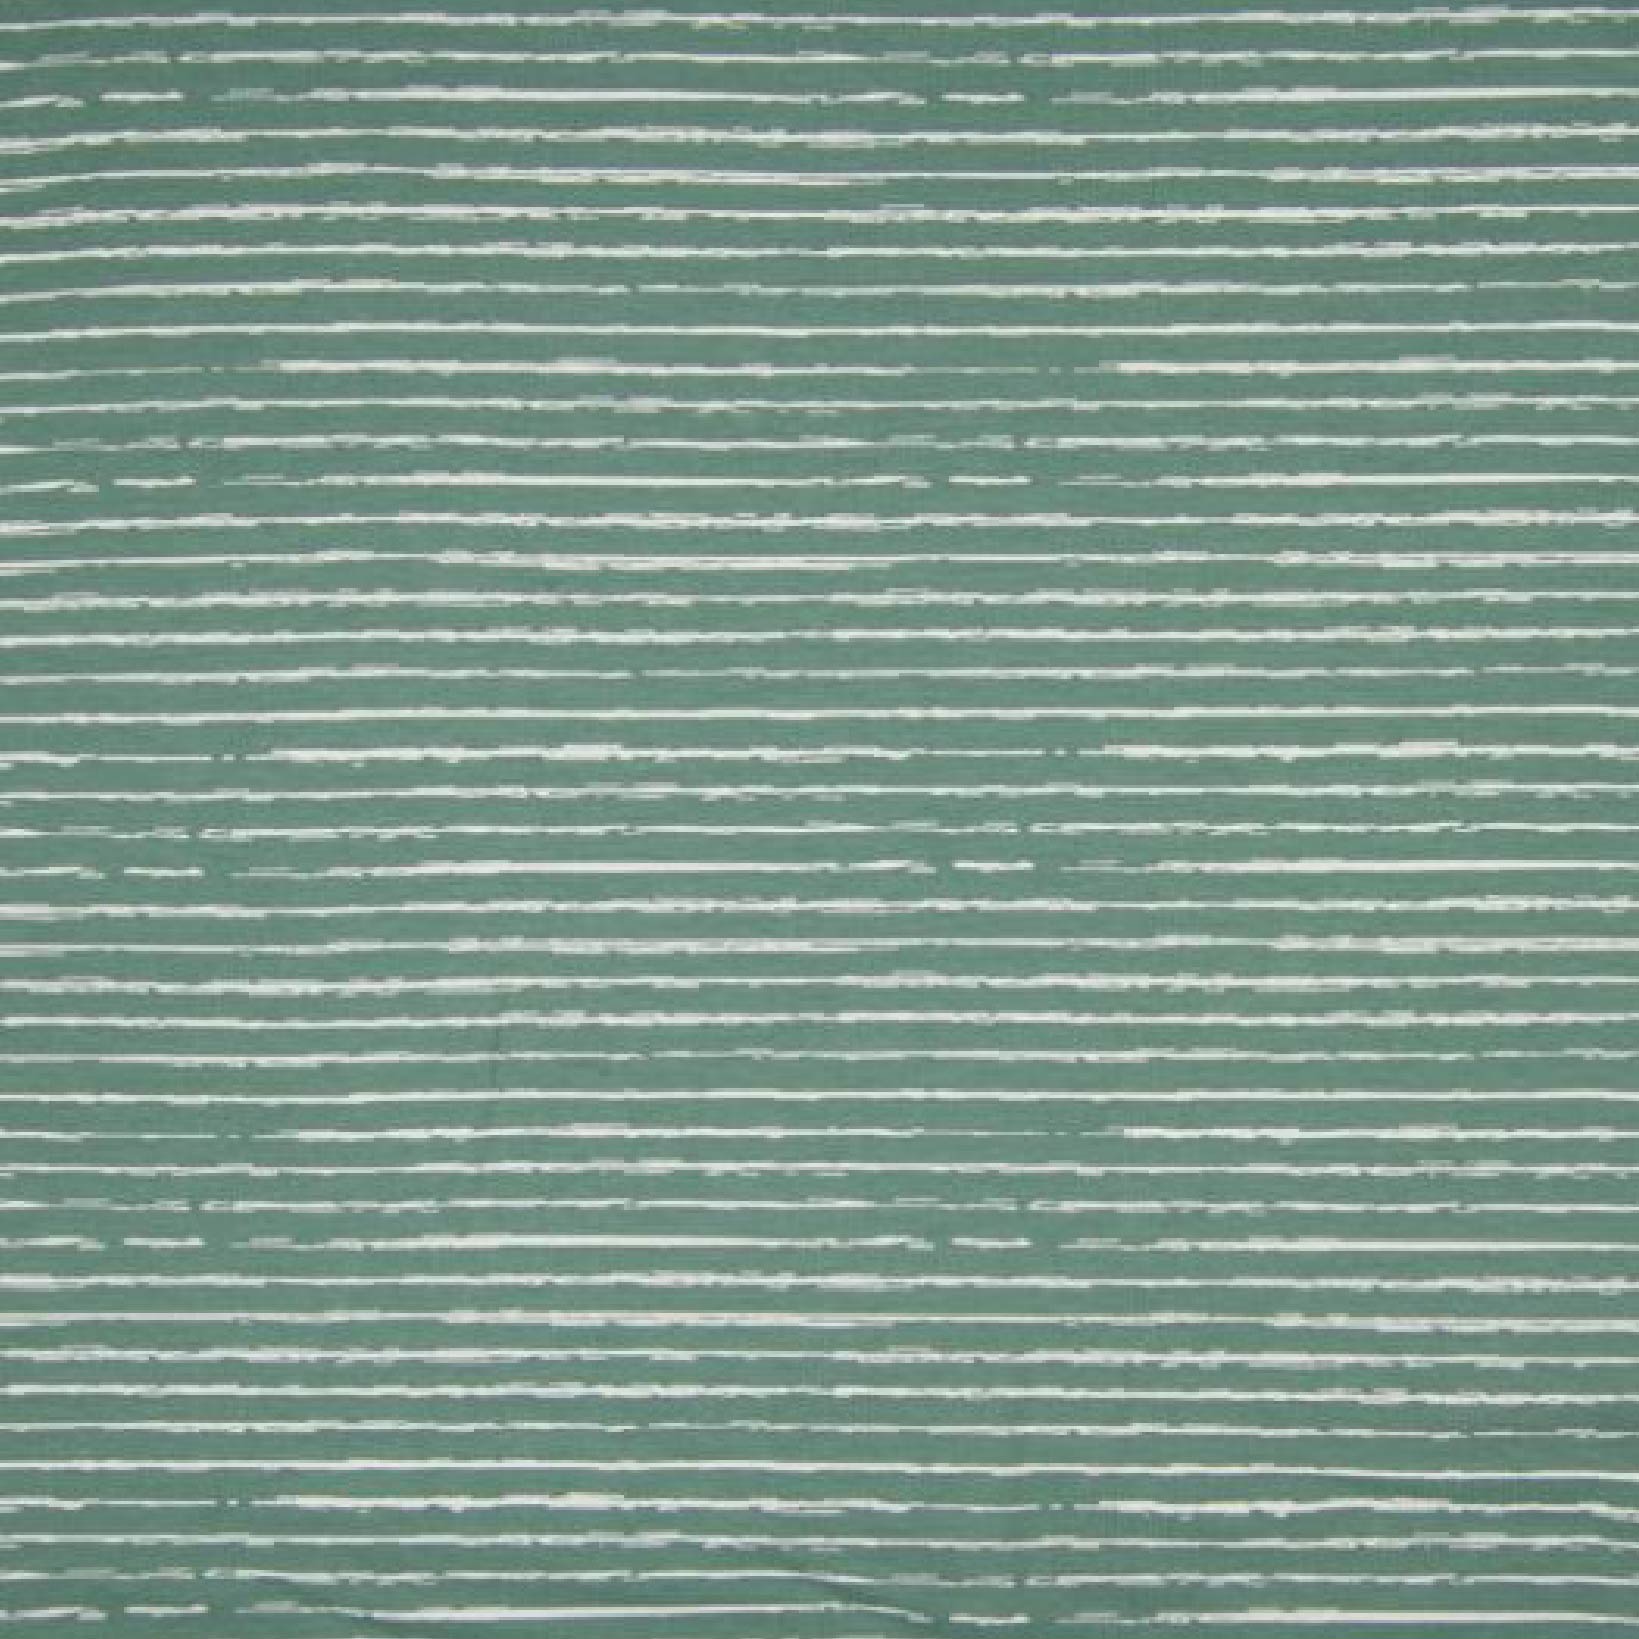 Striped white and dusty green - Striped jersey